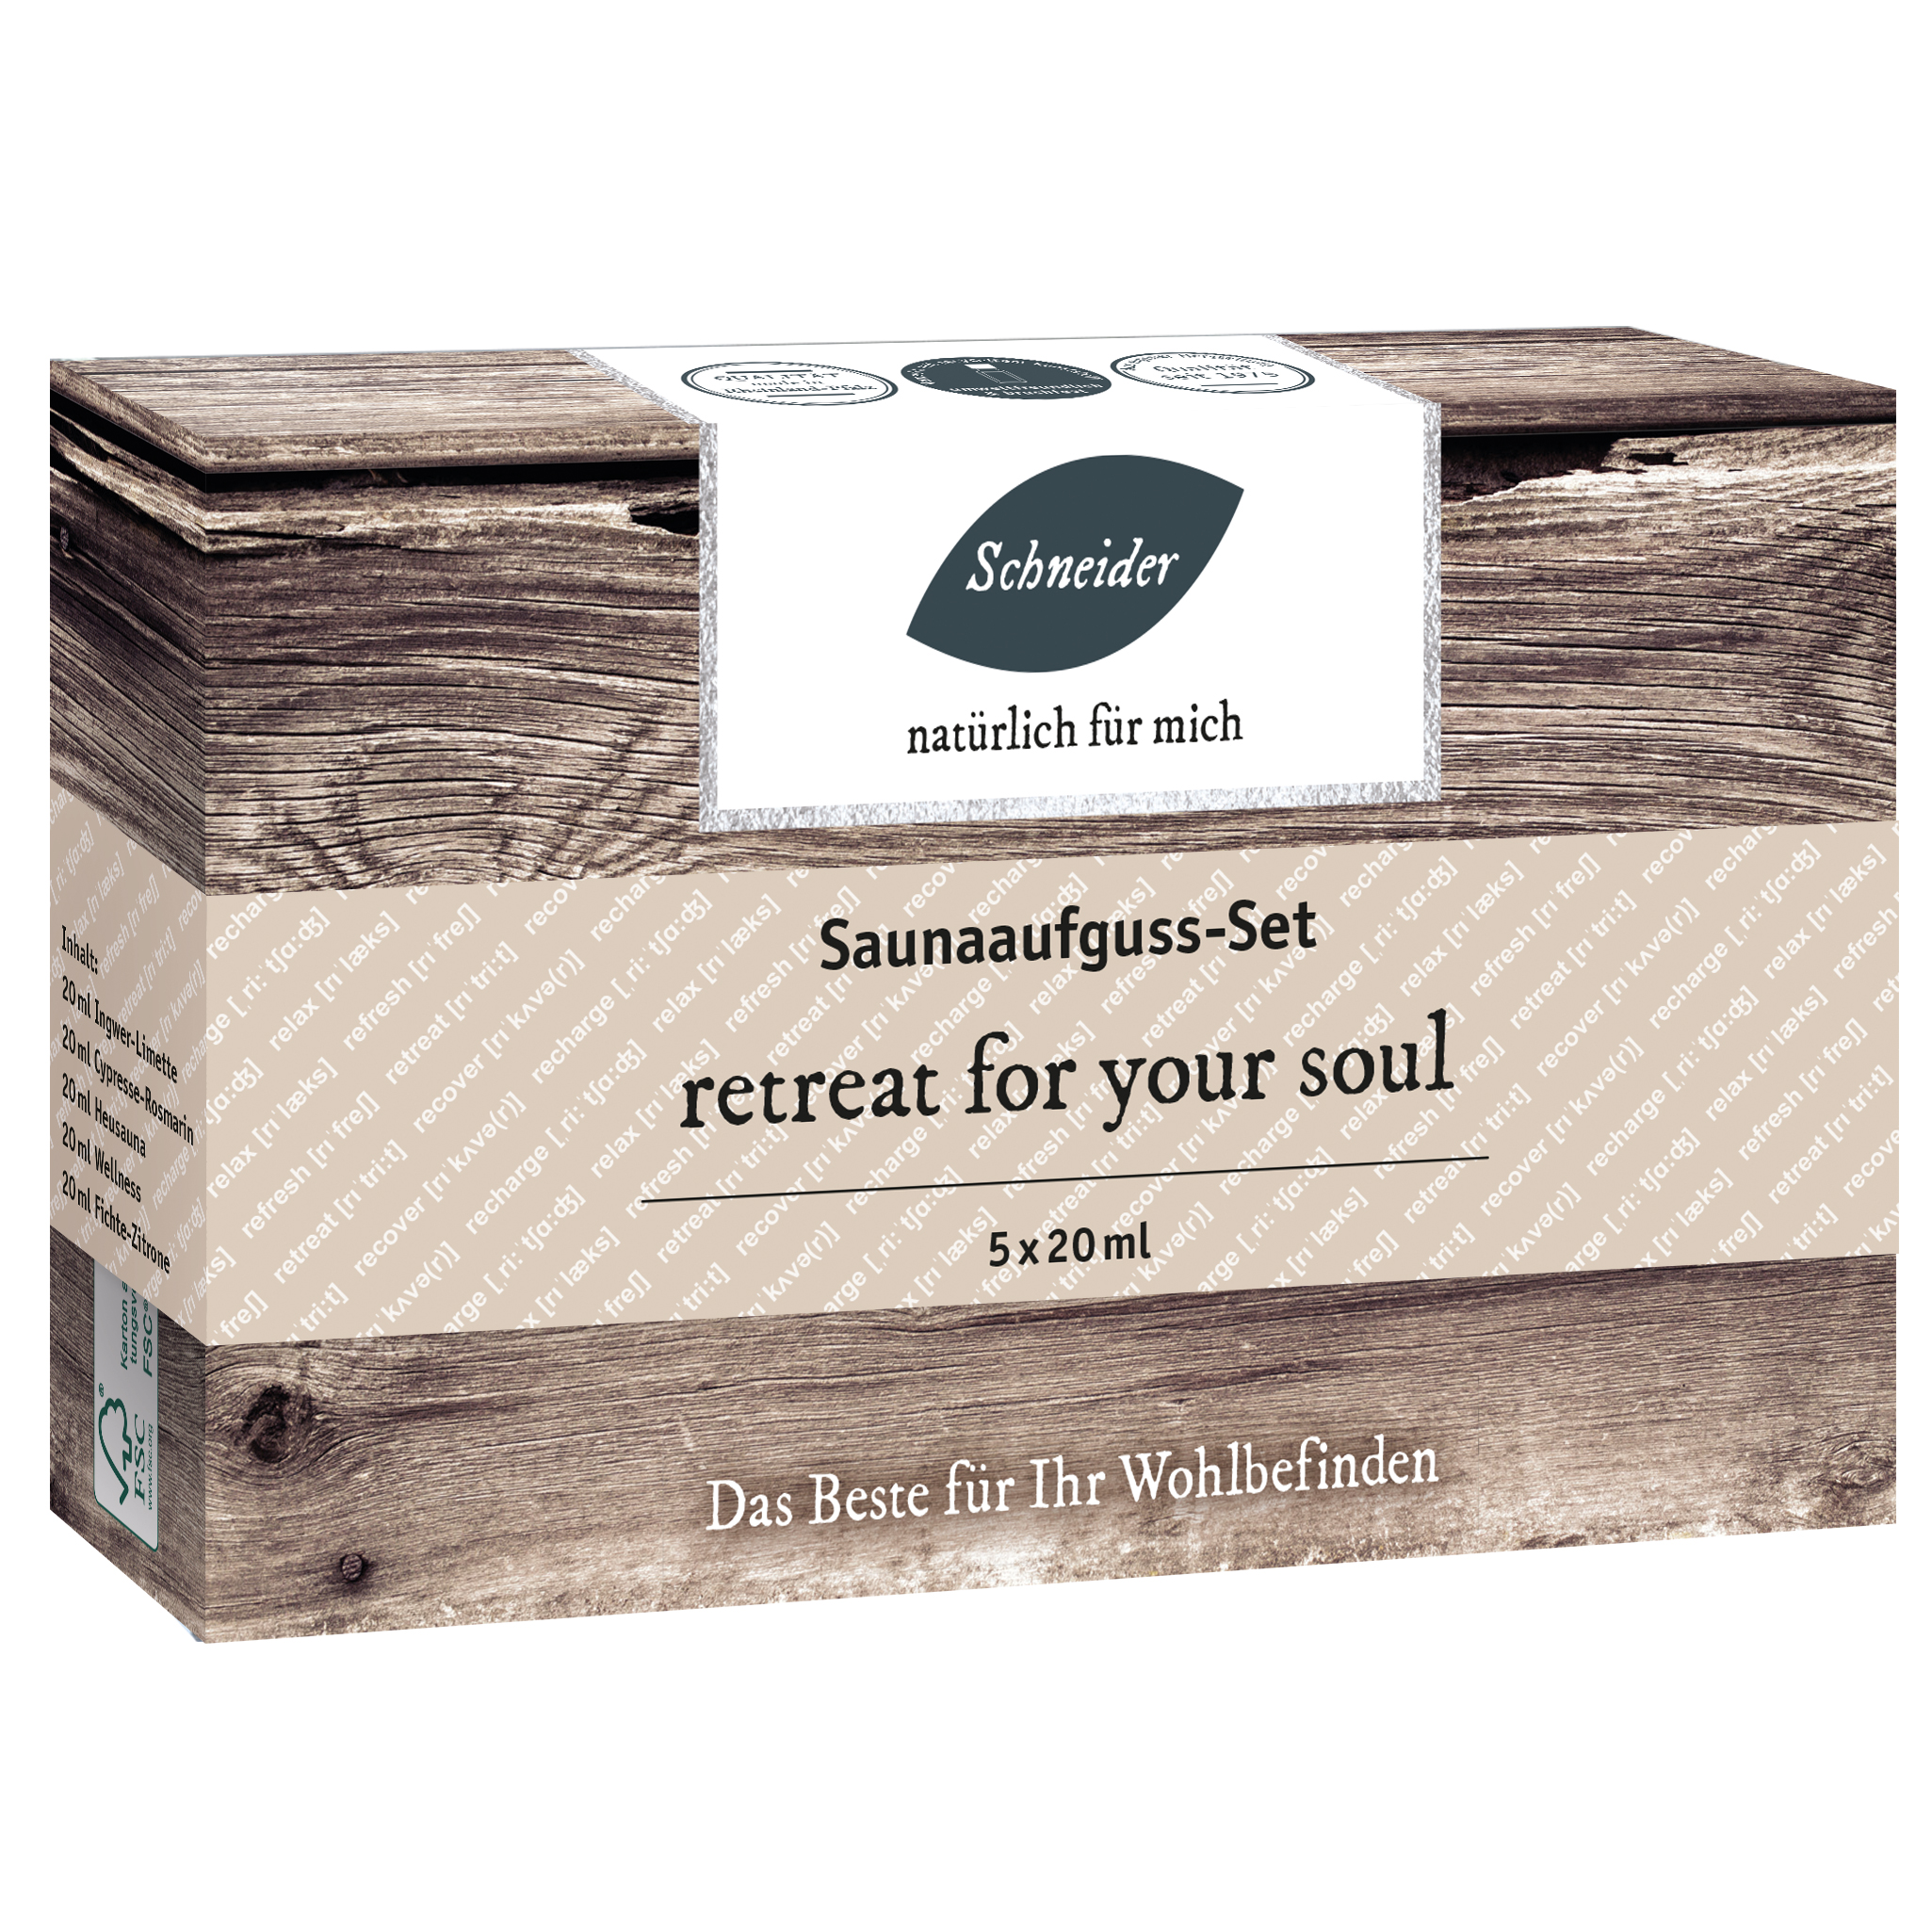 Saunaaufguss-Set - retreat for your soul